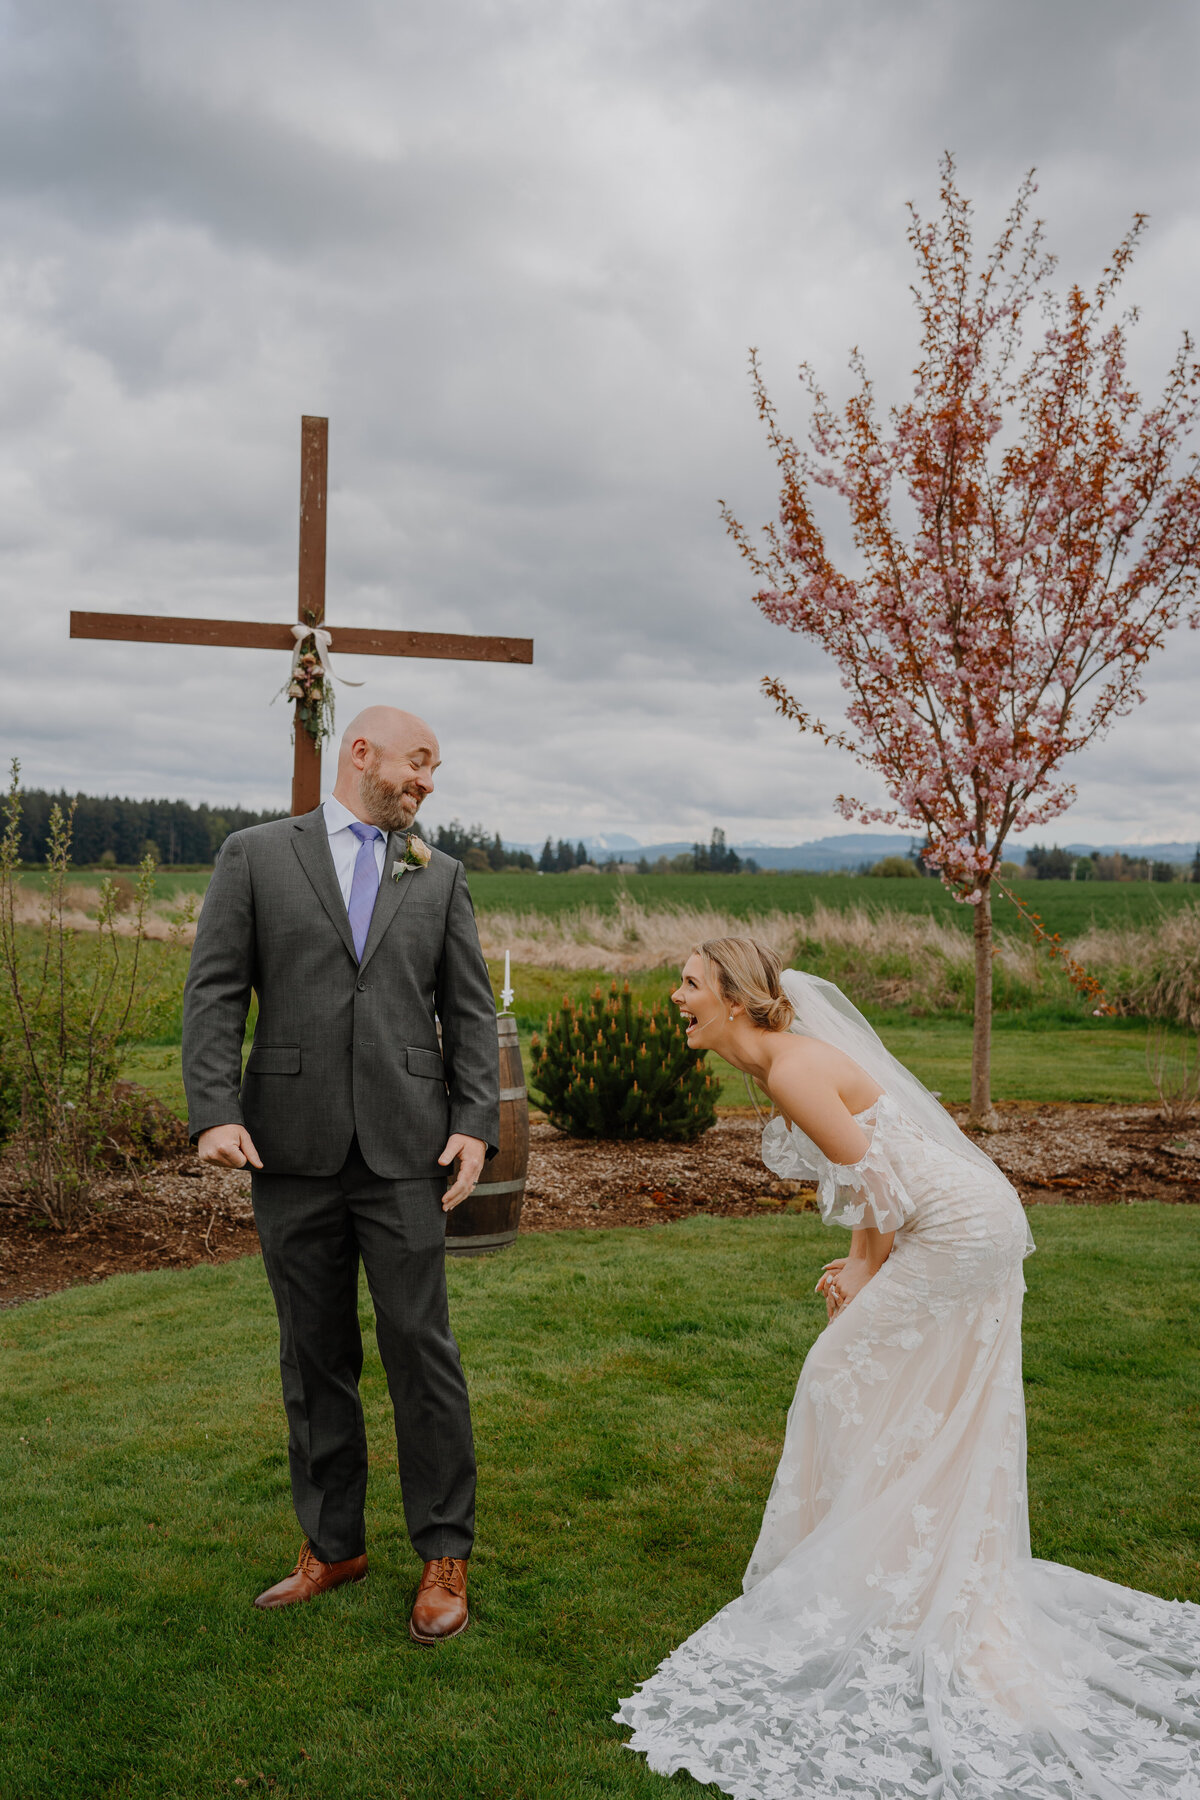 Father seeing bride's dress for the first time